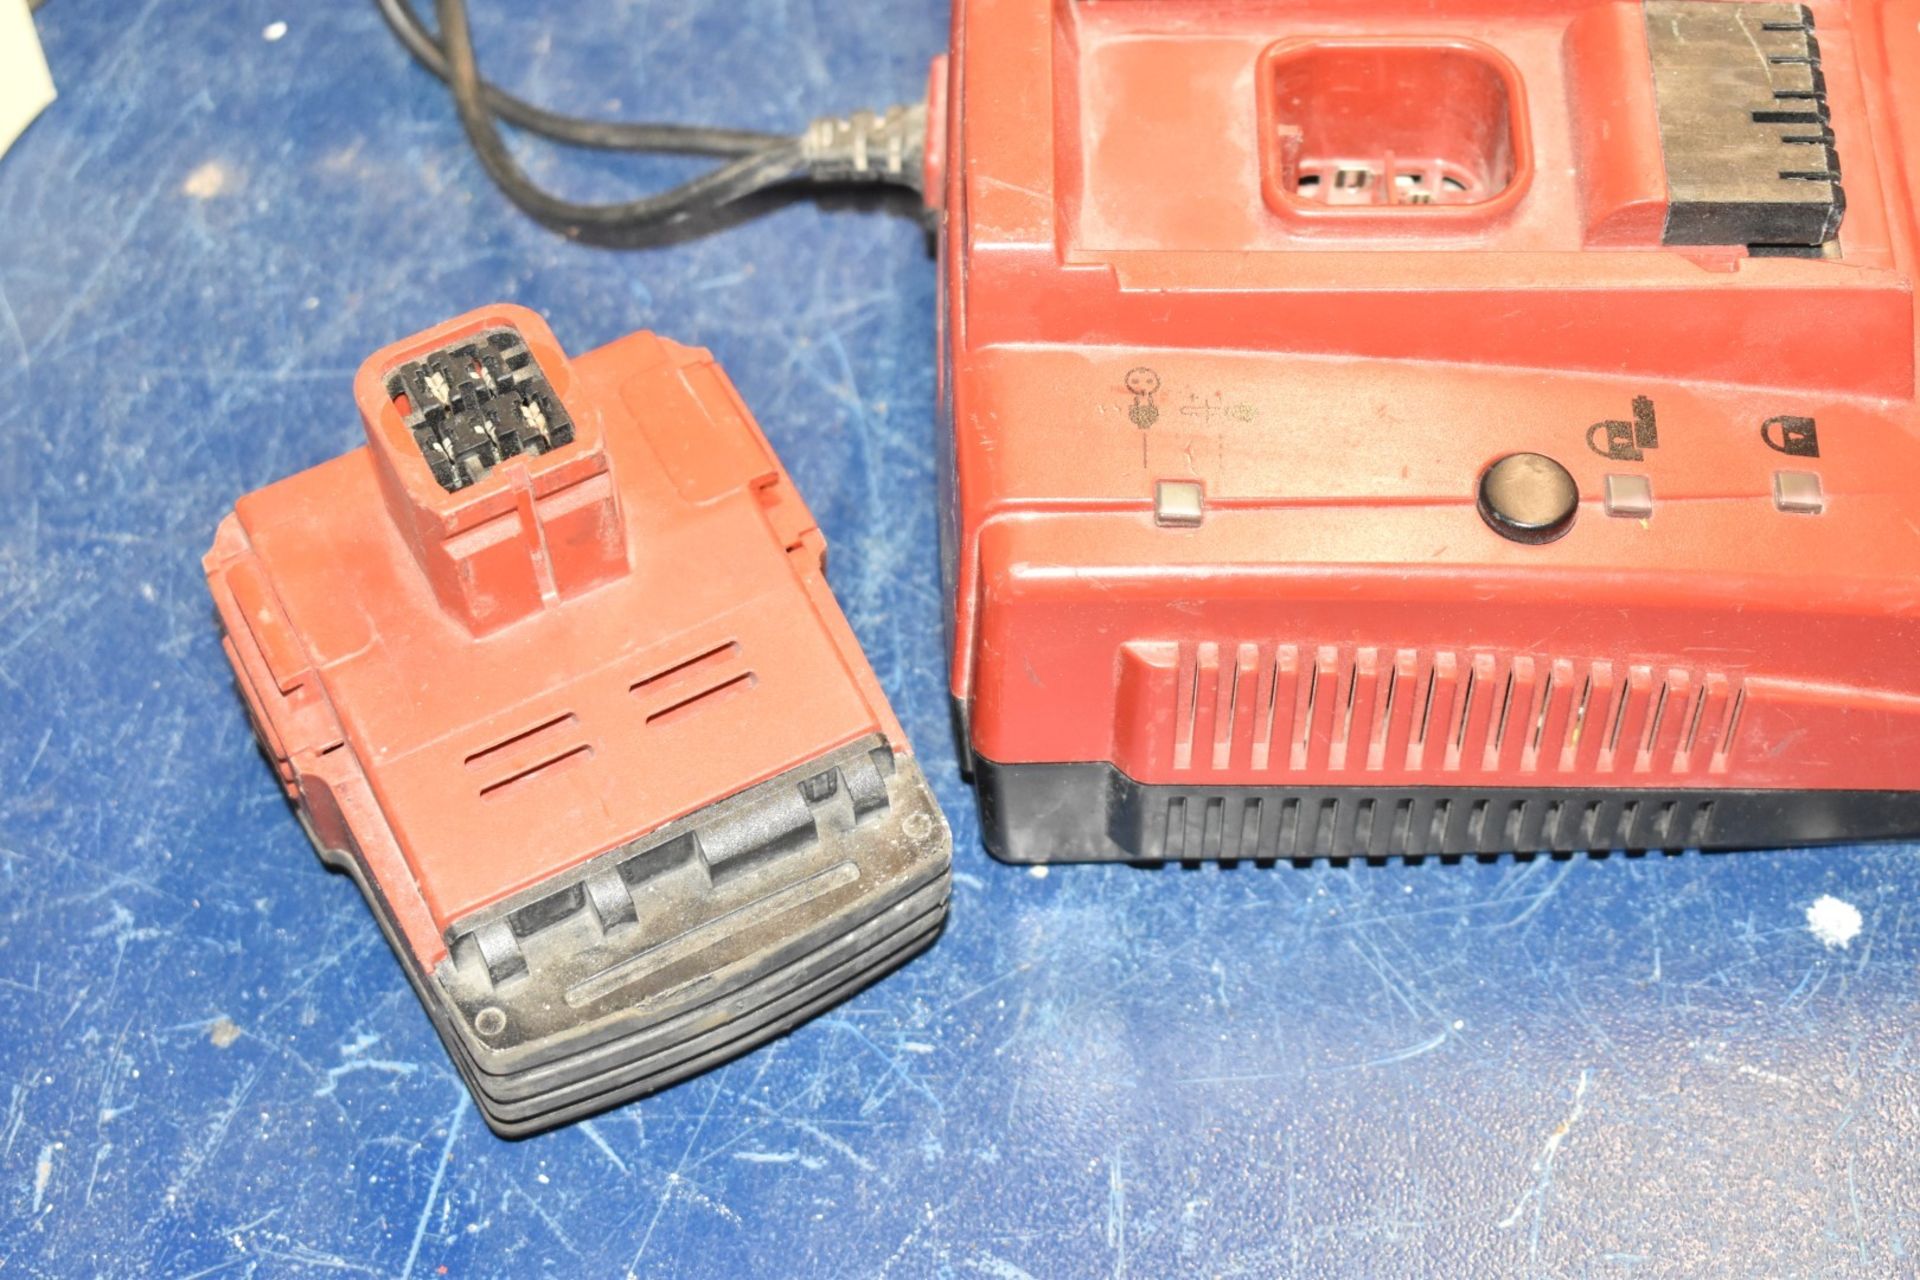 1 x Hilti Battery and Battery Charger Charger Type C 4/36ACS and Battery Type 328646 14.4v - Image 3 of 8